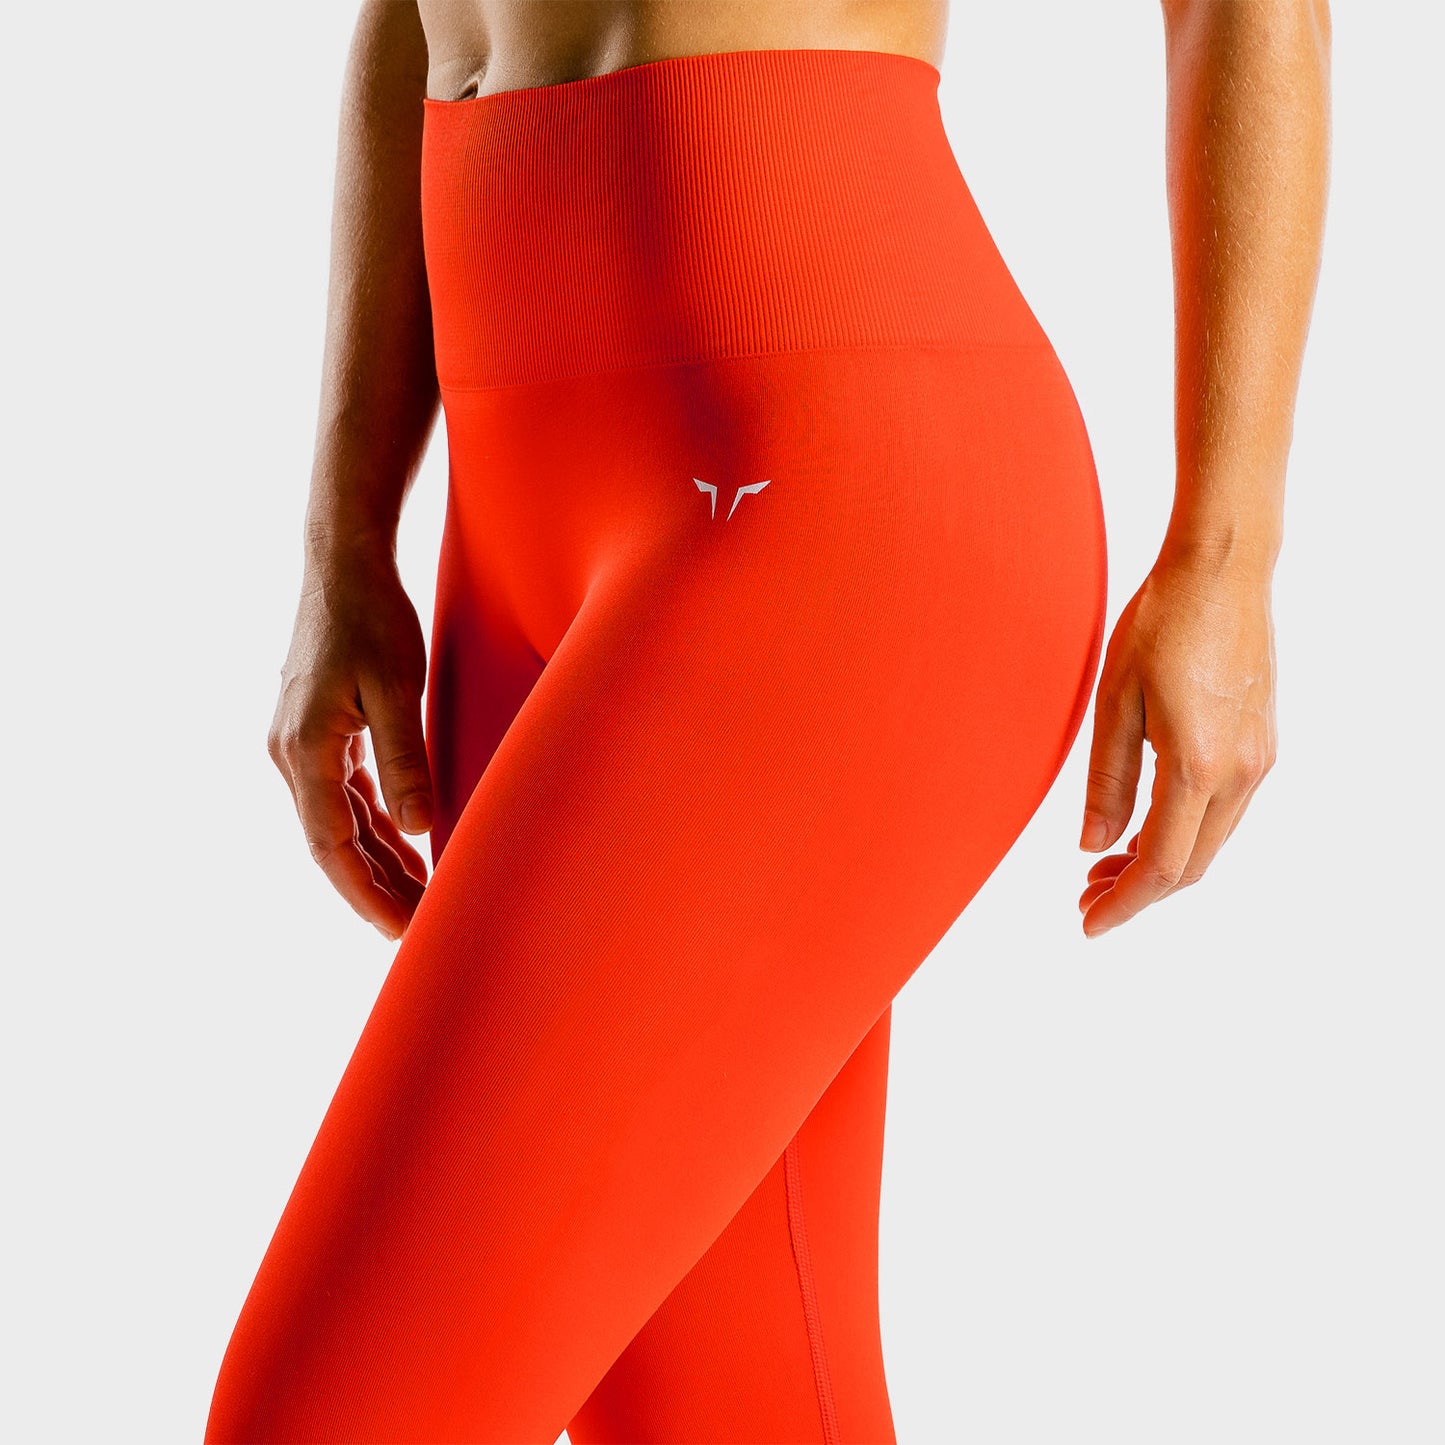 squatwolf-gym-leggings-for-women-core-seamless-leggings-flame-workout-clothes